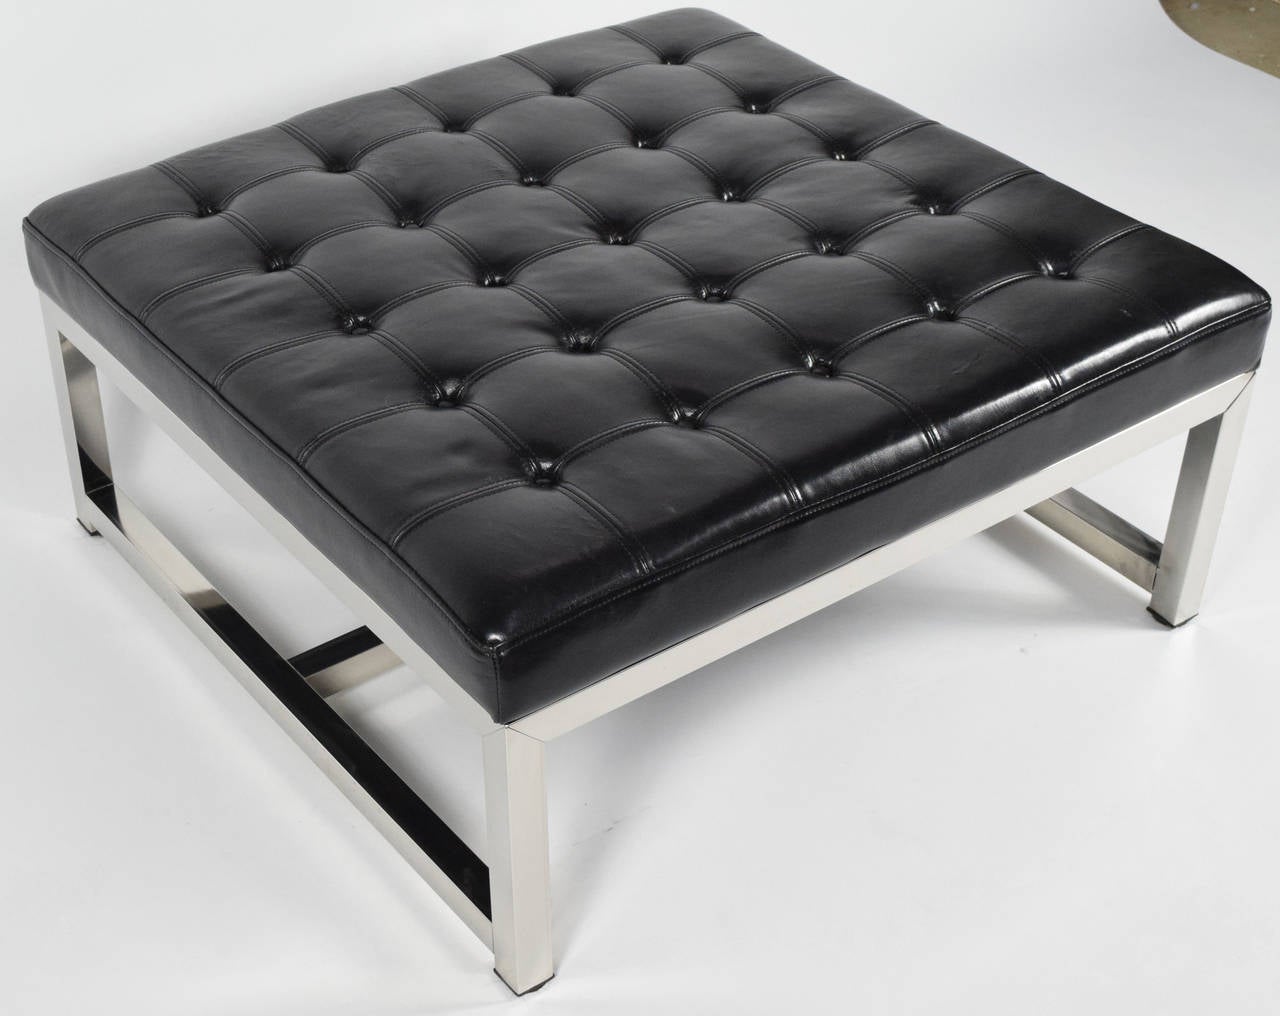 Beautiful black leather ottoman/bench in the style of Milo Baughman. Baseball stitching in grid pattern. Chrome base.